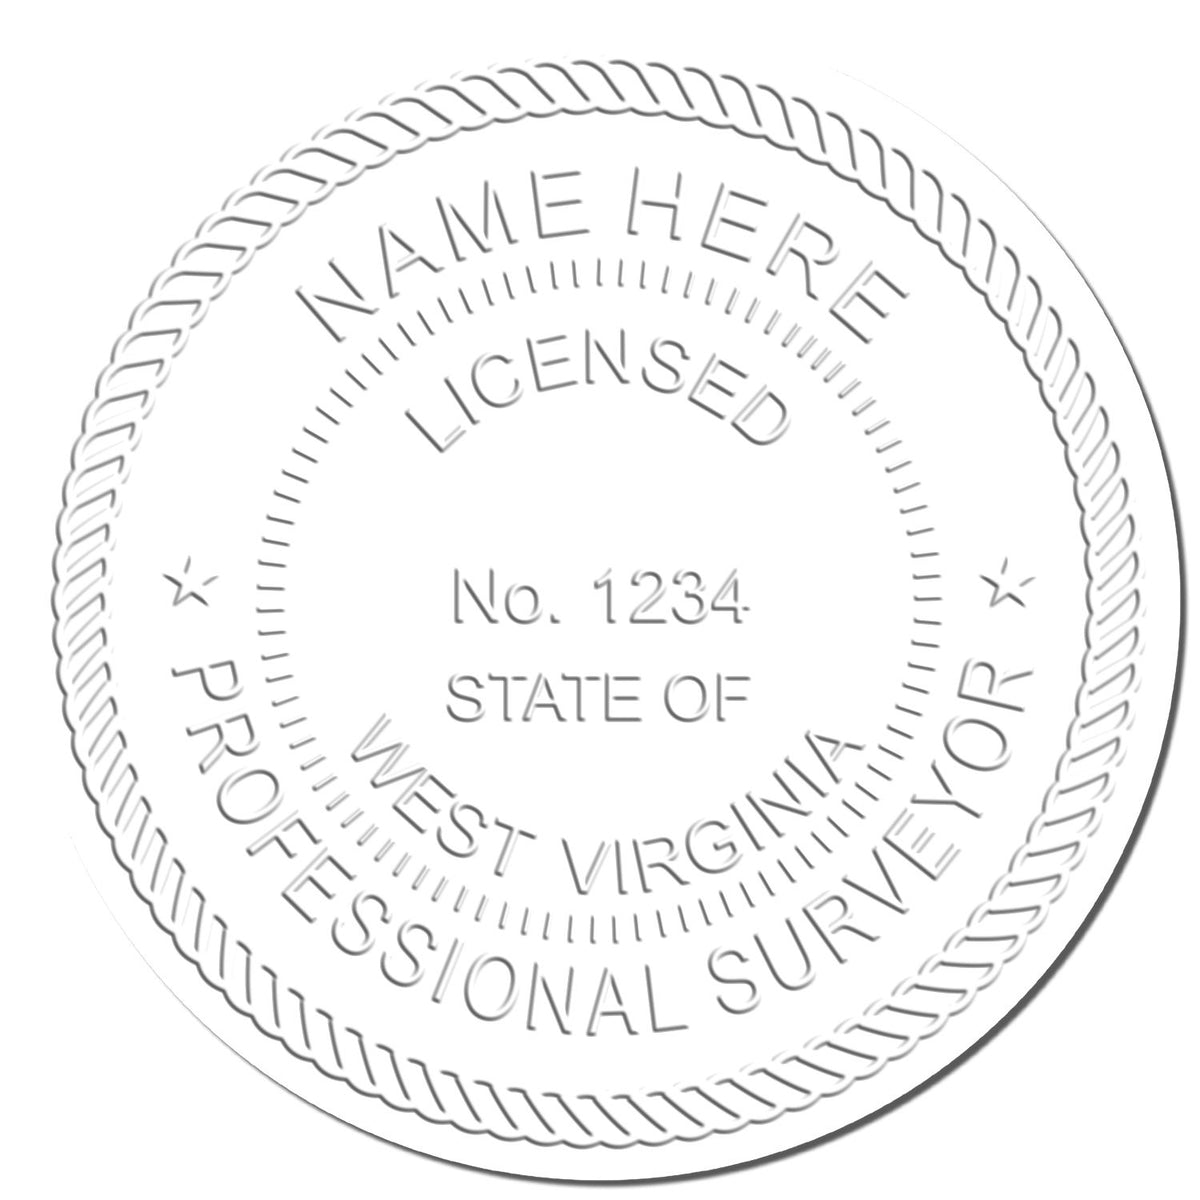 This paper is stamped with a sample imprint of the State of West Virginia Soft Land Surveyor Embossing Seal, signifying its quality and reliability.